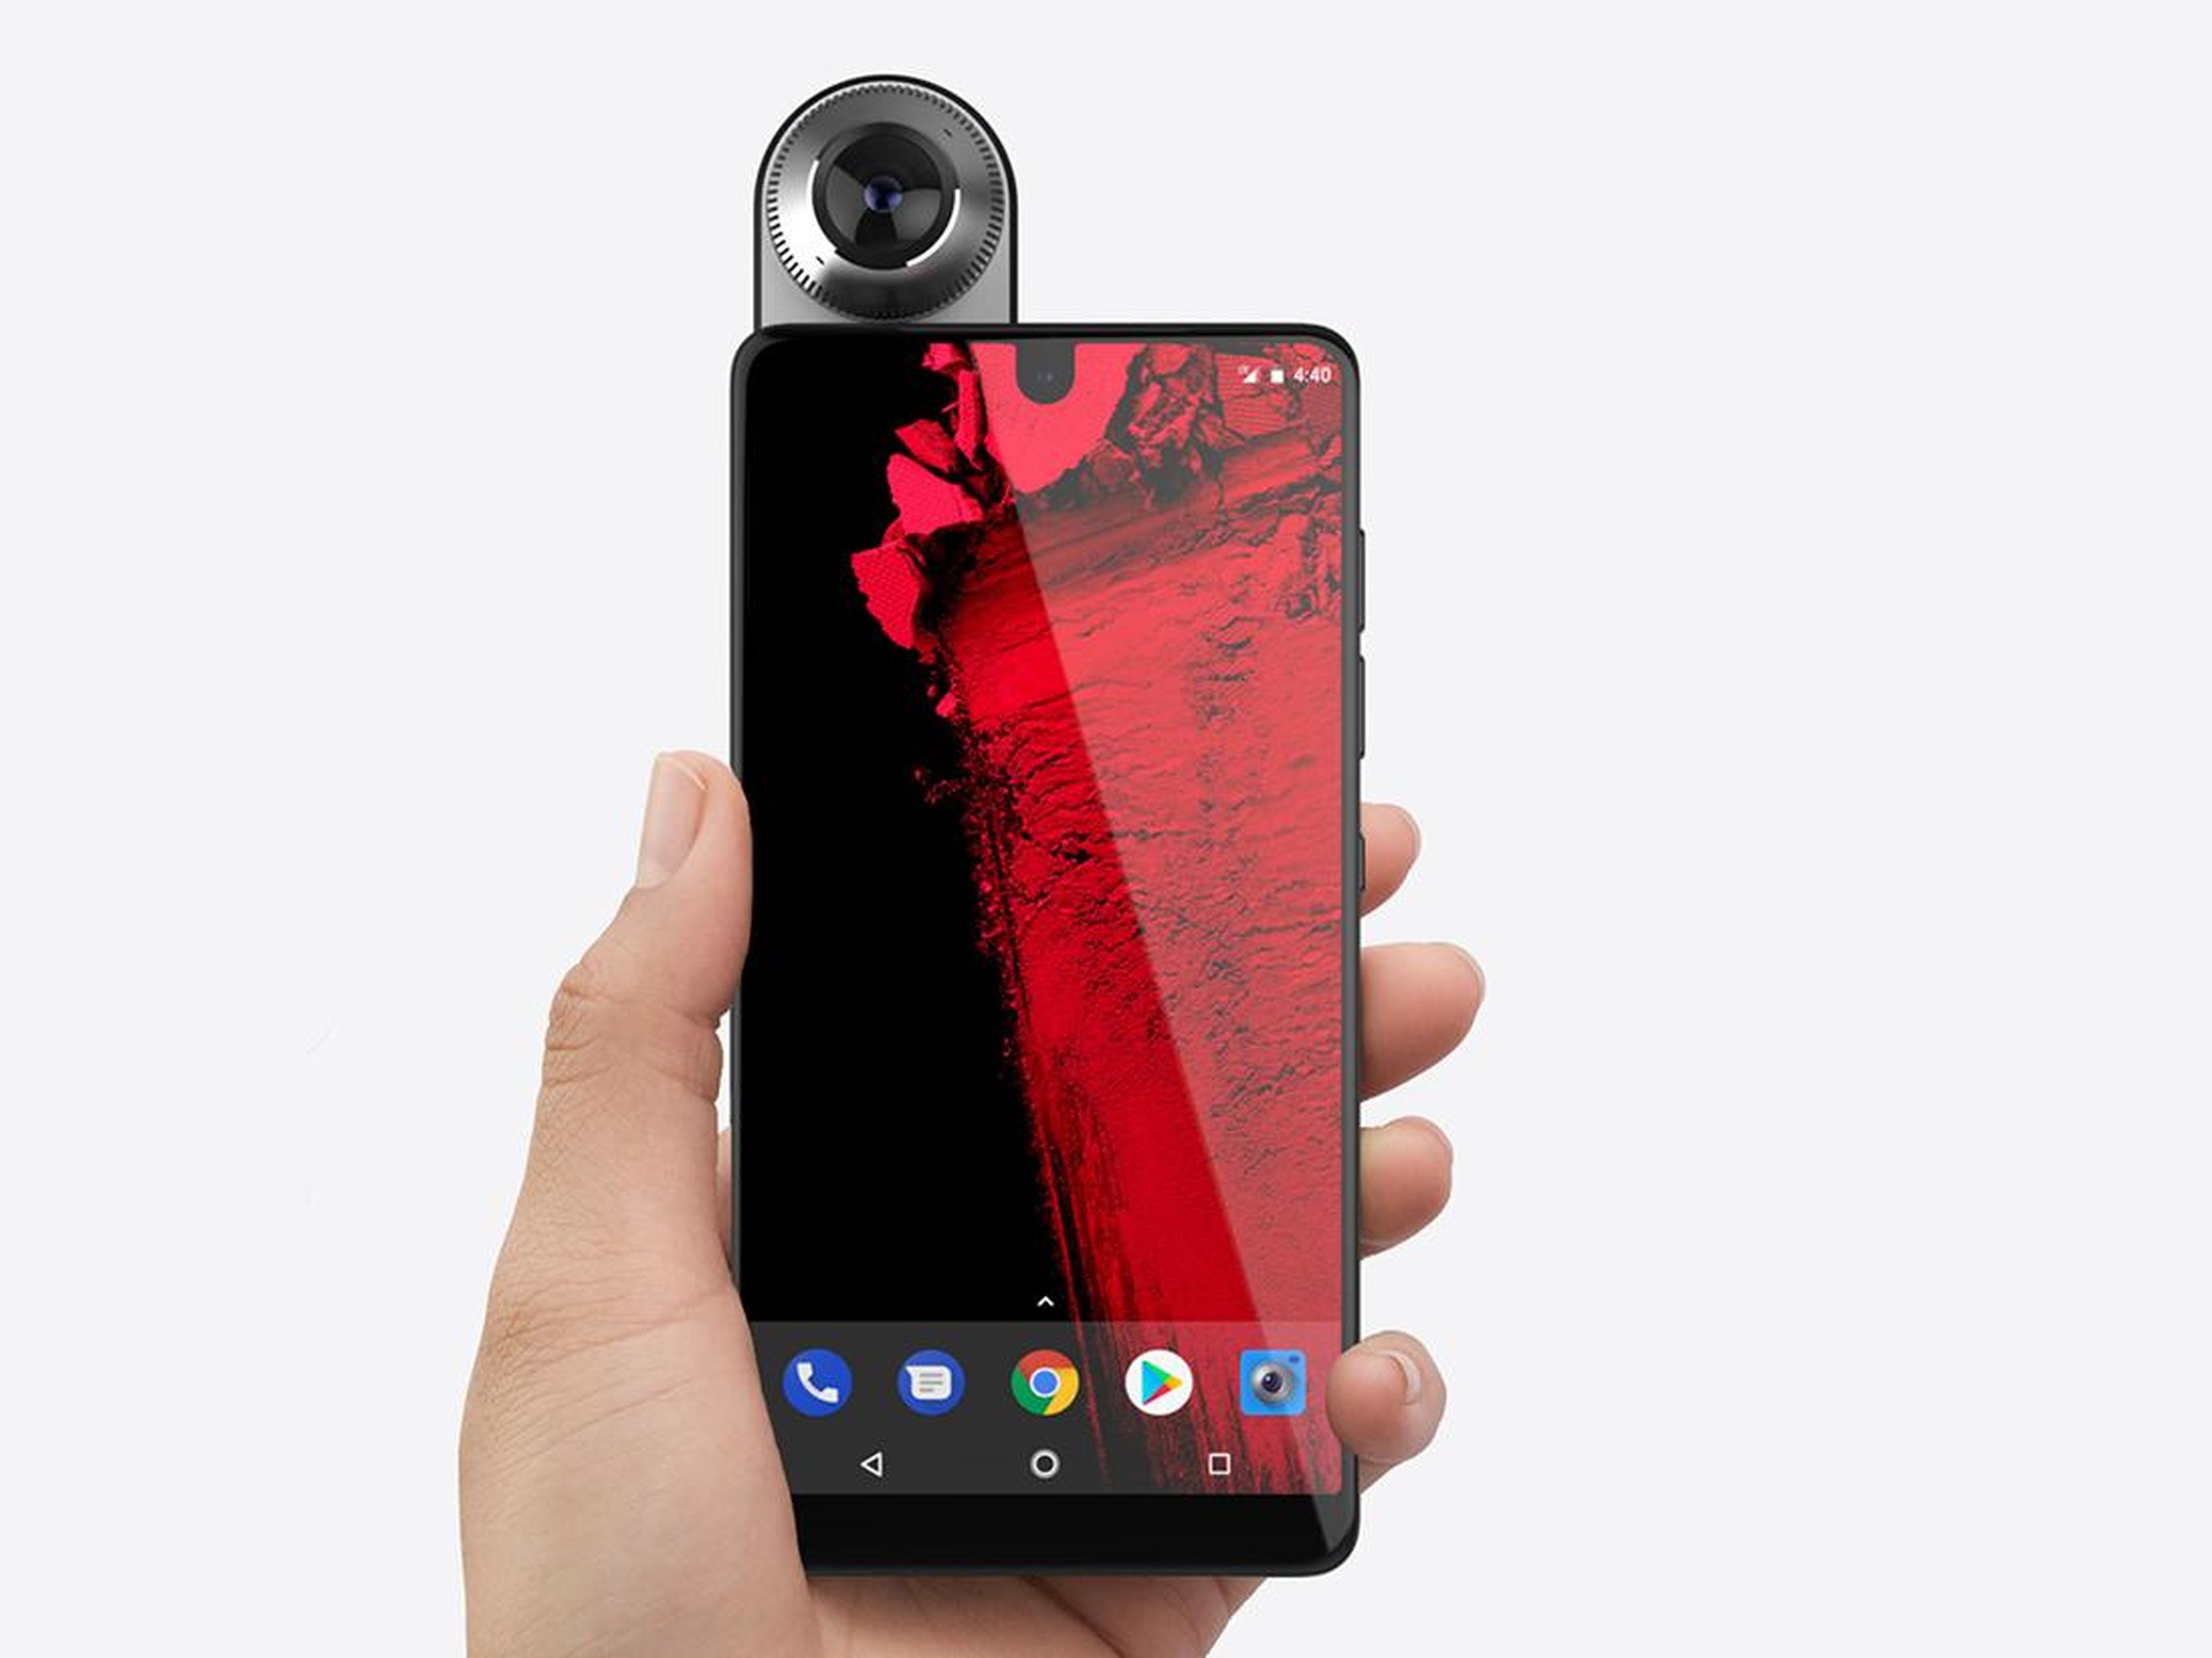 The Essential Phone uses magnetic pins on the back that allow it to snap on accessories such as this 360-degree camera.